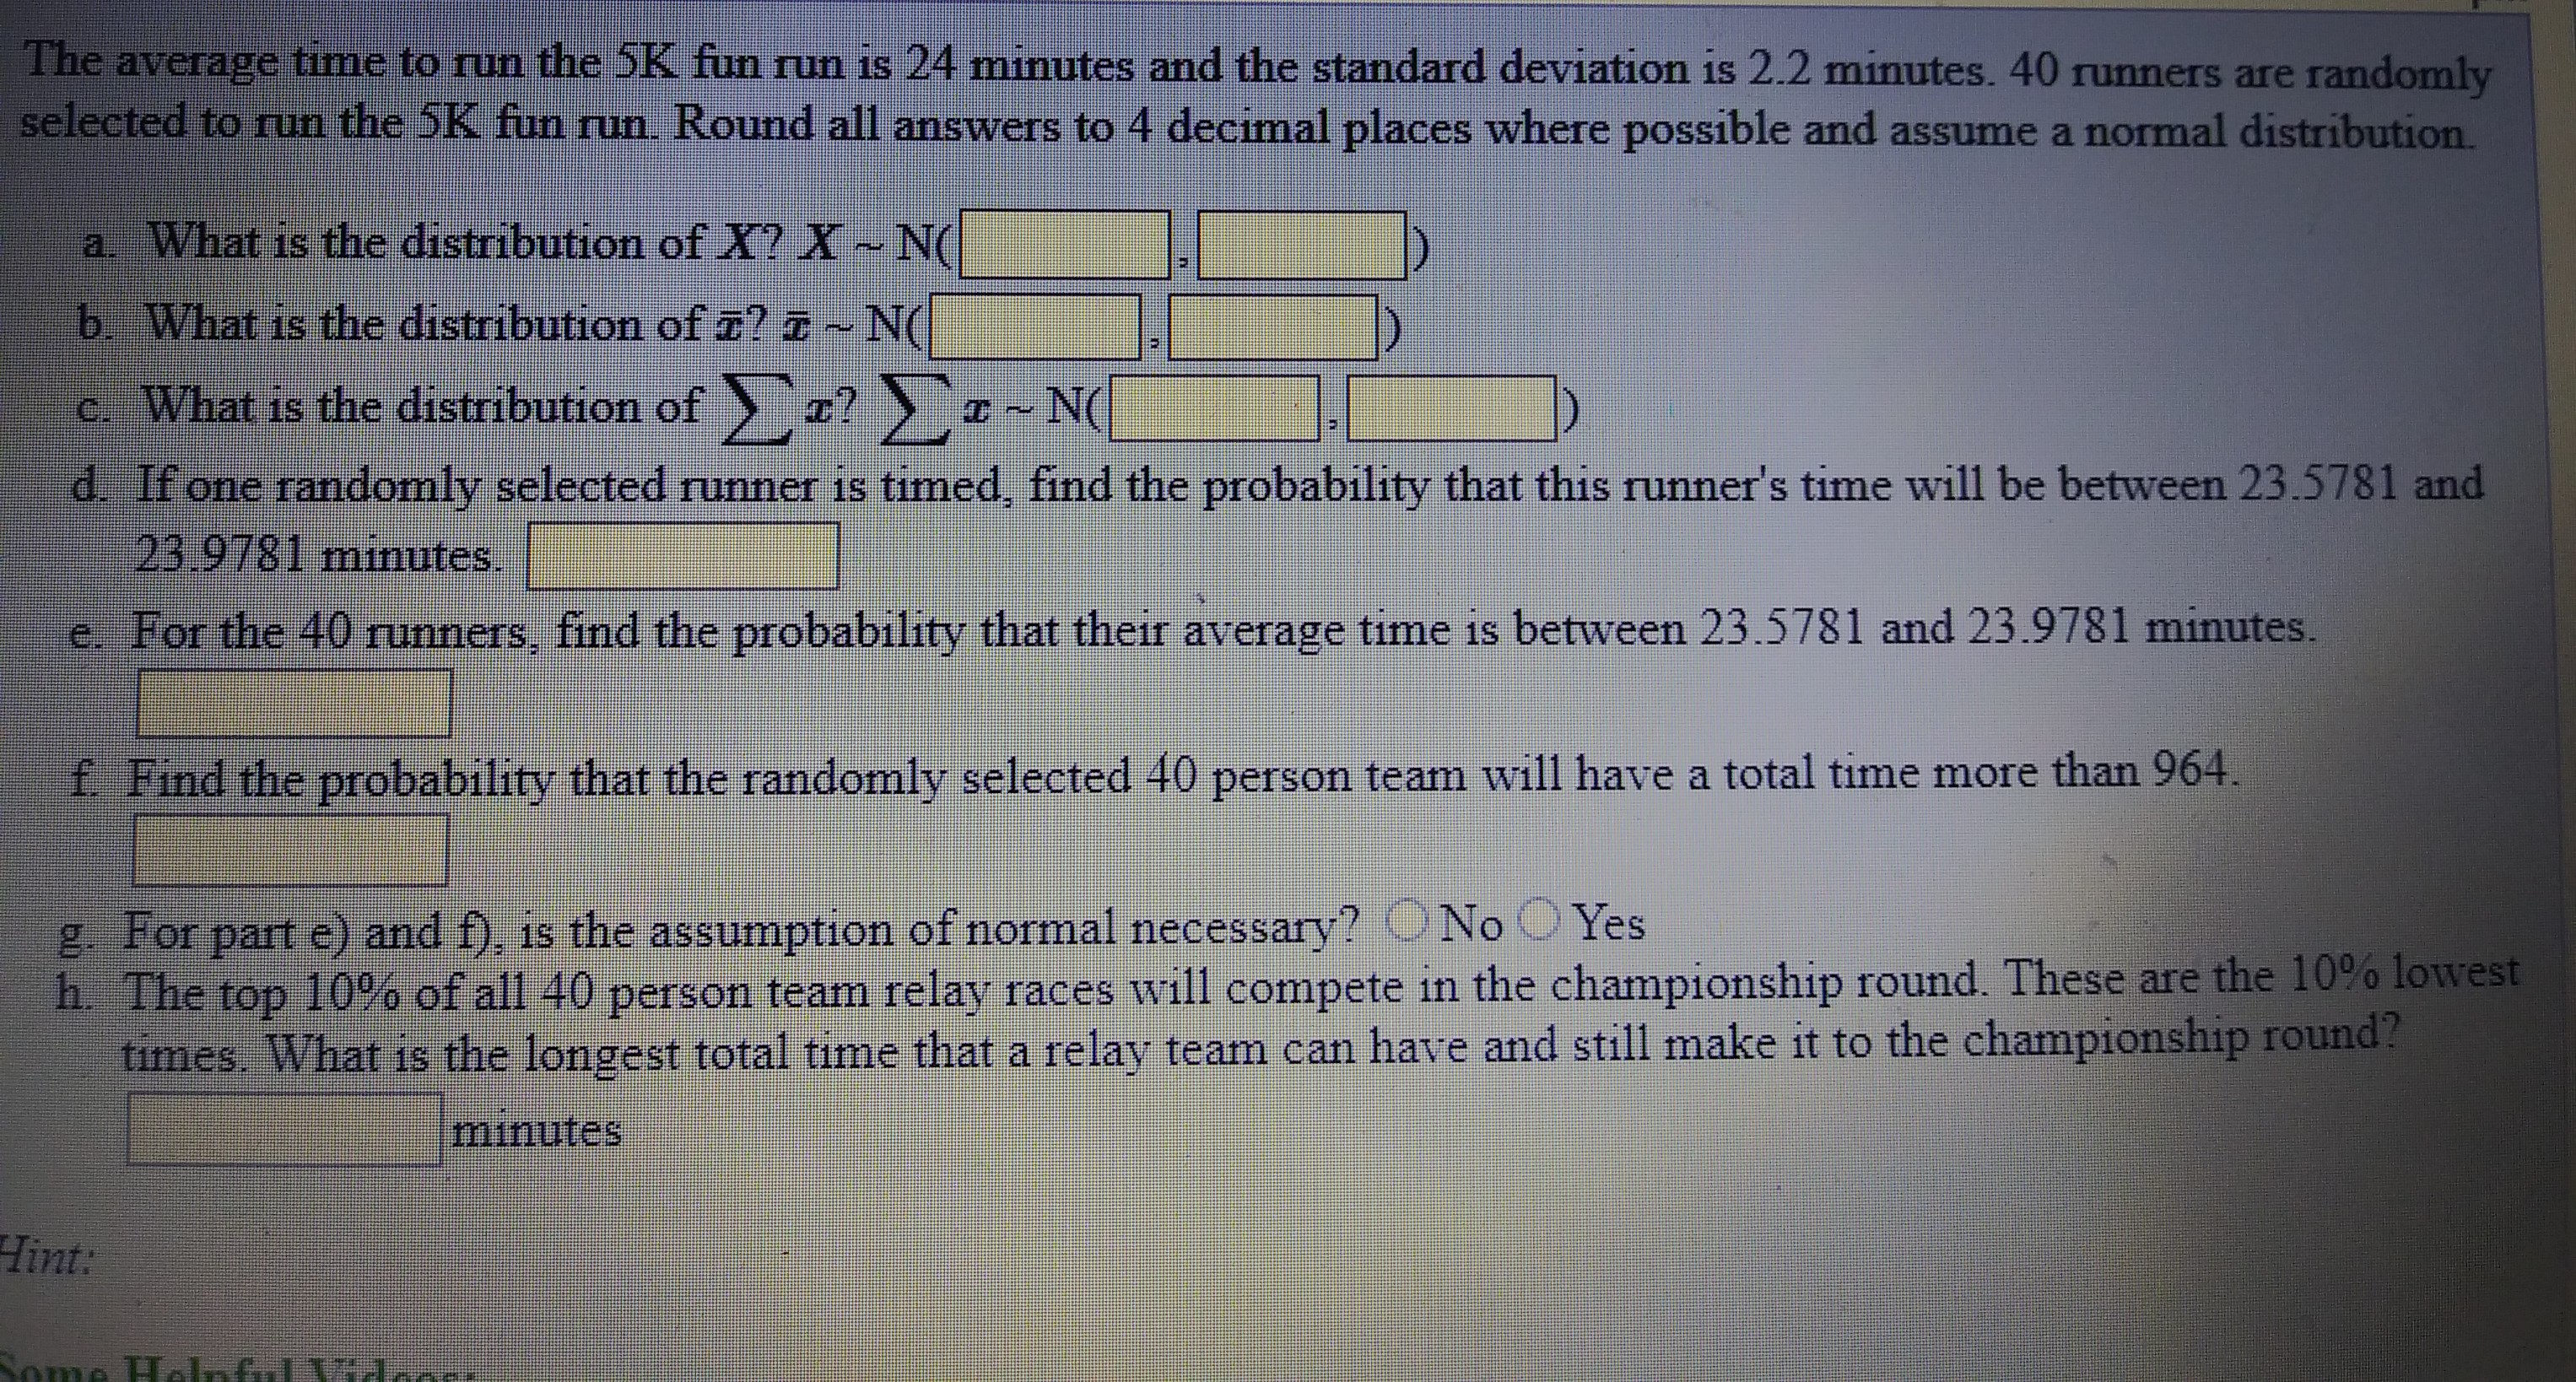 The average time to run the SK fun run is 24 minutes and the standard deviation is 2.2 minutes. 40 unners are randomly
selected to run the 5K fun run. Round all answers to 4 decimal places where possible and assume a normal distribution.
a What is the distribution of X? X~ N(
b. What is the distribution of ¤? ¤ ~ N(
c. What is the distribution of
z ~ N(
z?
d. If one randomly selected runner is timed, find the probability that this runner's time will be between 23.5781 and
23.9781 minutes.
e. For the 40 runners, find the probability that their average time is between 23.5781 and 23.9781 minutes.
f Find the probability that the randomly selected 40 person team will have a total time more than 964.
g For part e) and f), is the assumption of normal necessary? ONo O Yes
h. The top 10%% of all 40 person team relay races will compete in the championship round. These are the 10% lowest
times. What is the longest total time that a relay team can have and still make it to the championship round?
minutes
Hint:
Some Helnful Vidoor
